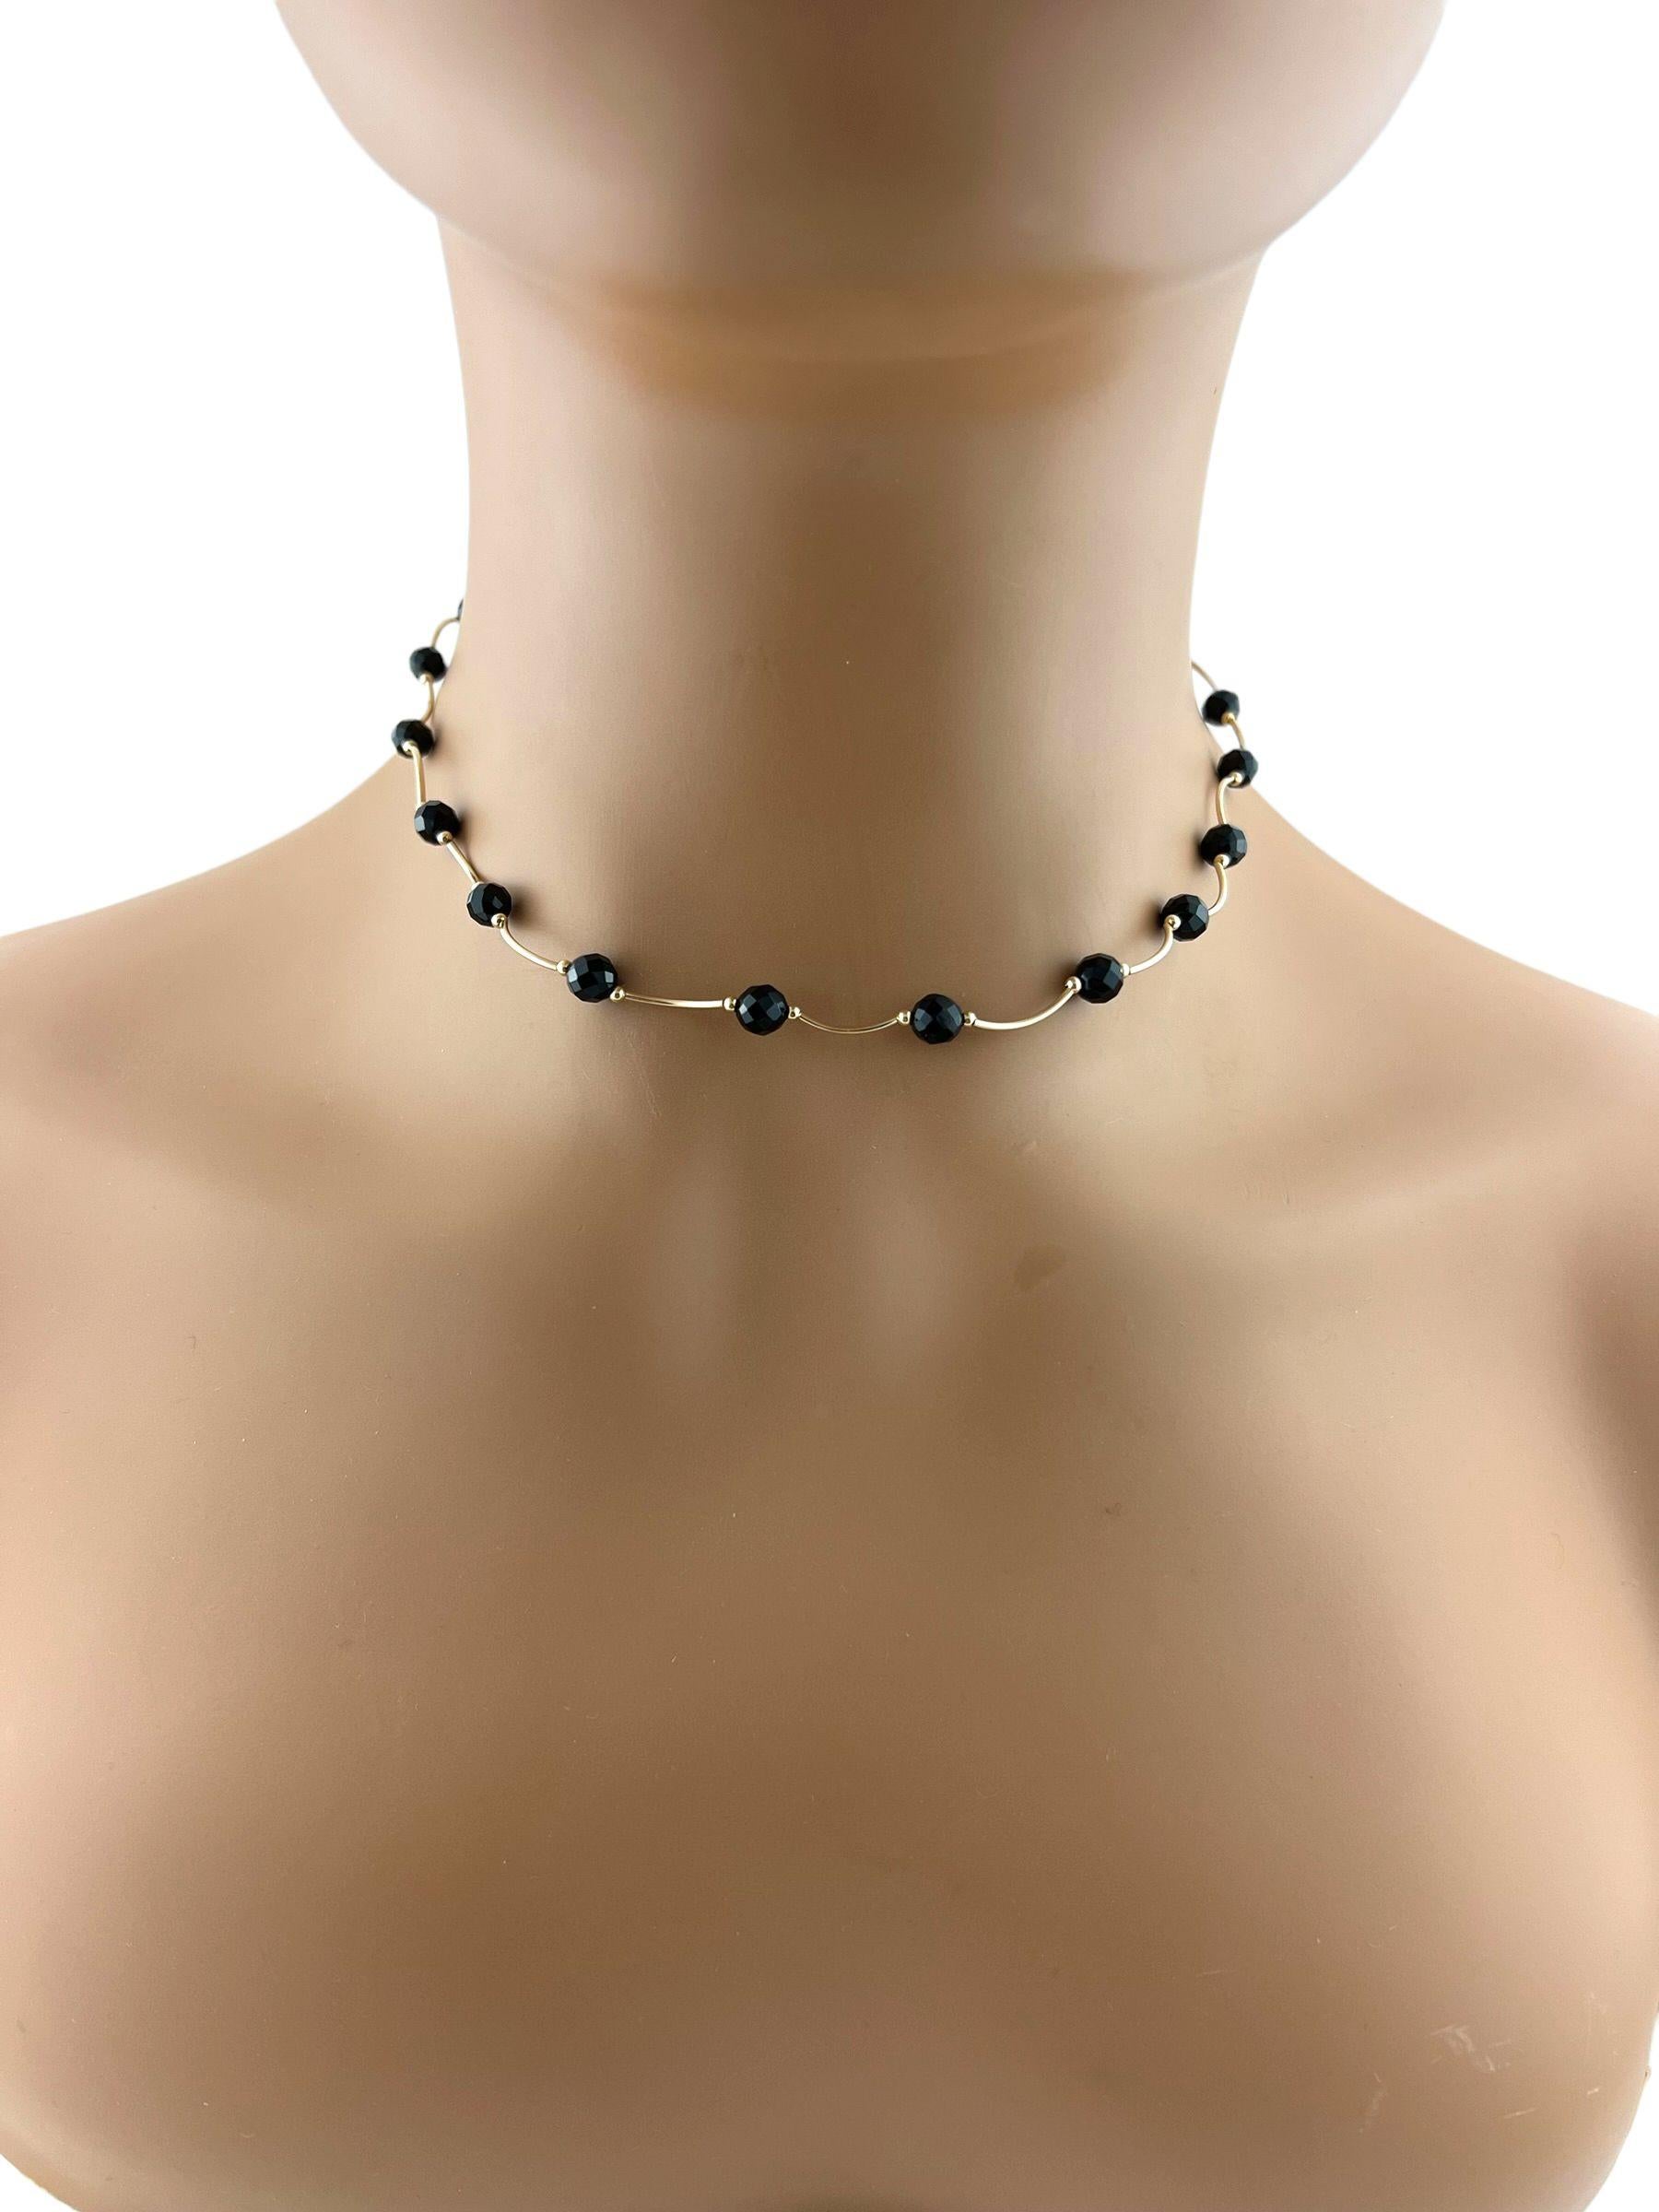 14K Yellow Gold Black Onyx Bead Necklace #12617 In Good Condition For Sale In Washington Depot, CT